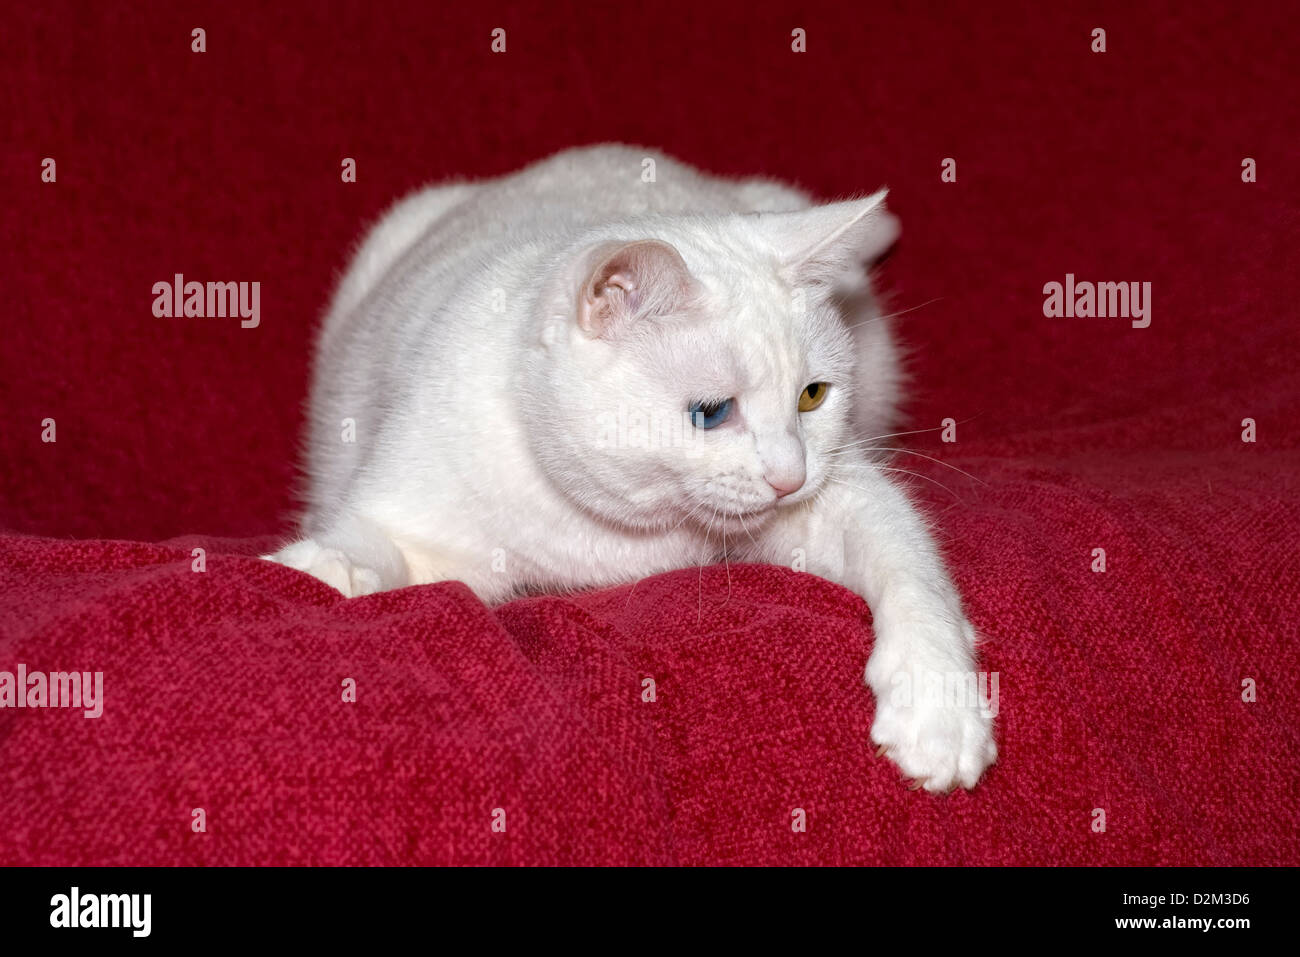 White cat with different coloured eyes taken against a reddish pink background with paw hanging down Stock Photo